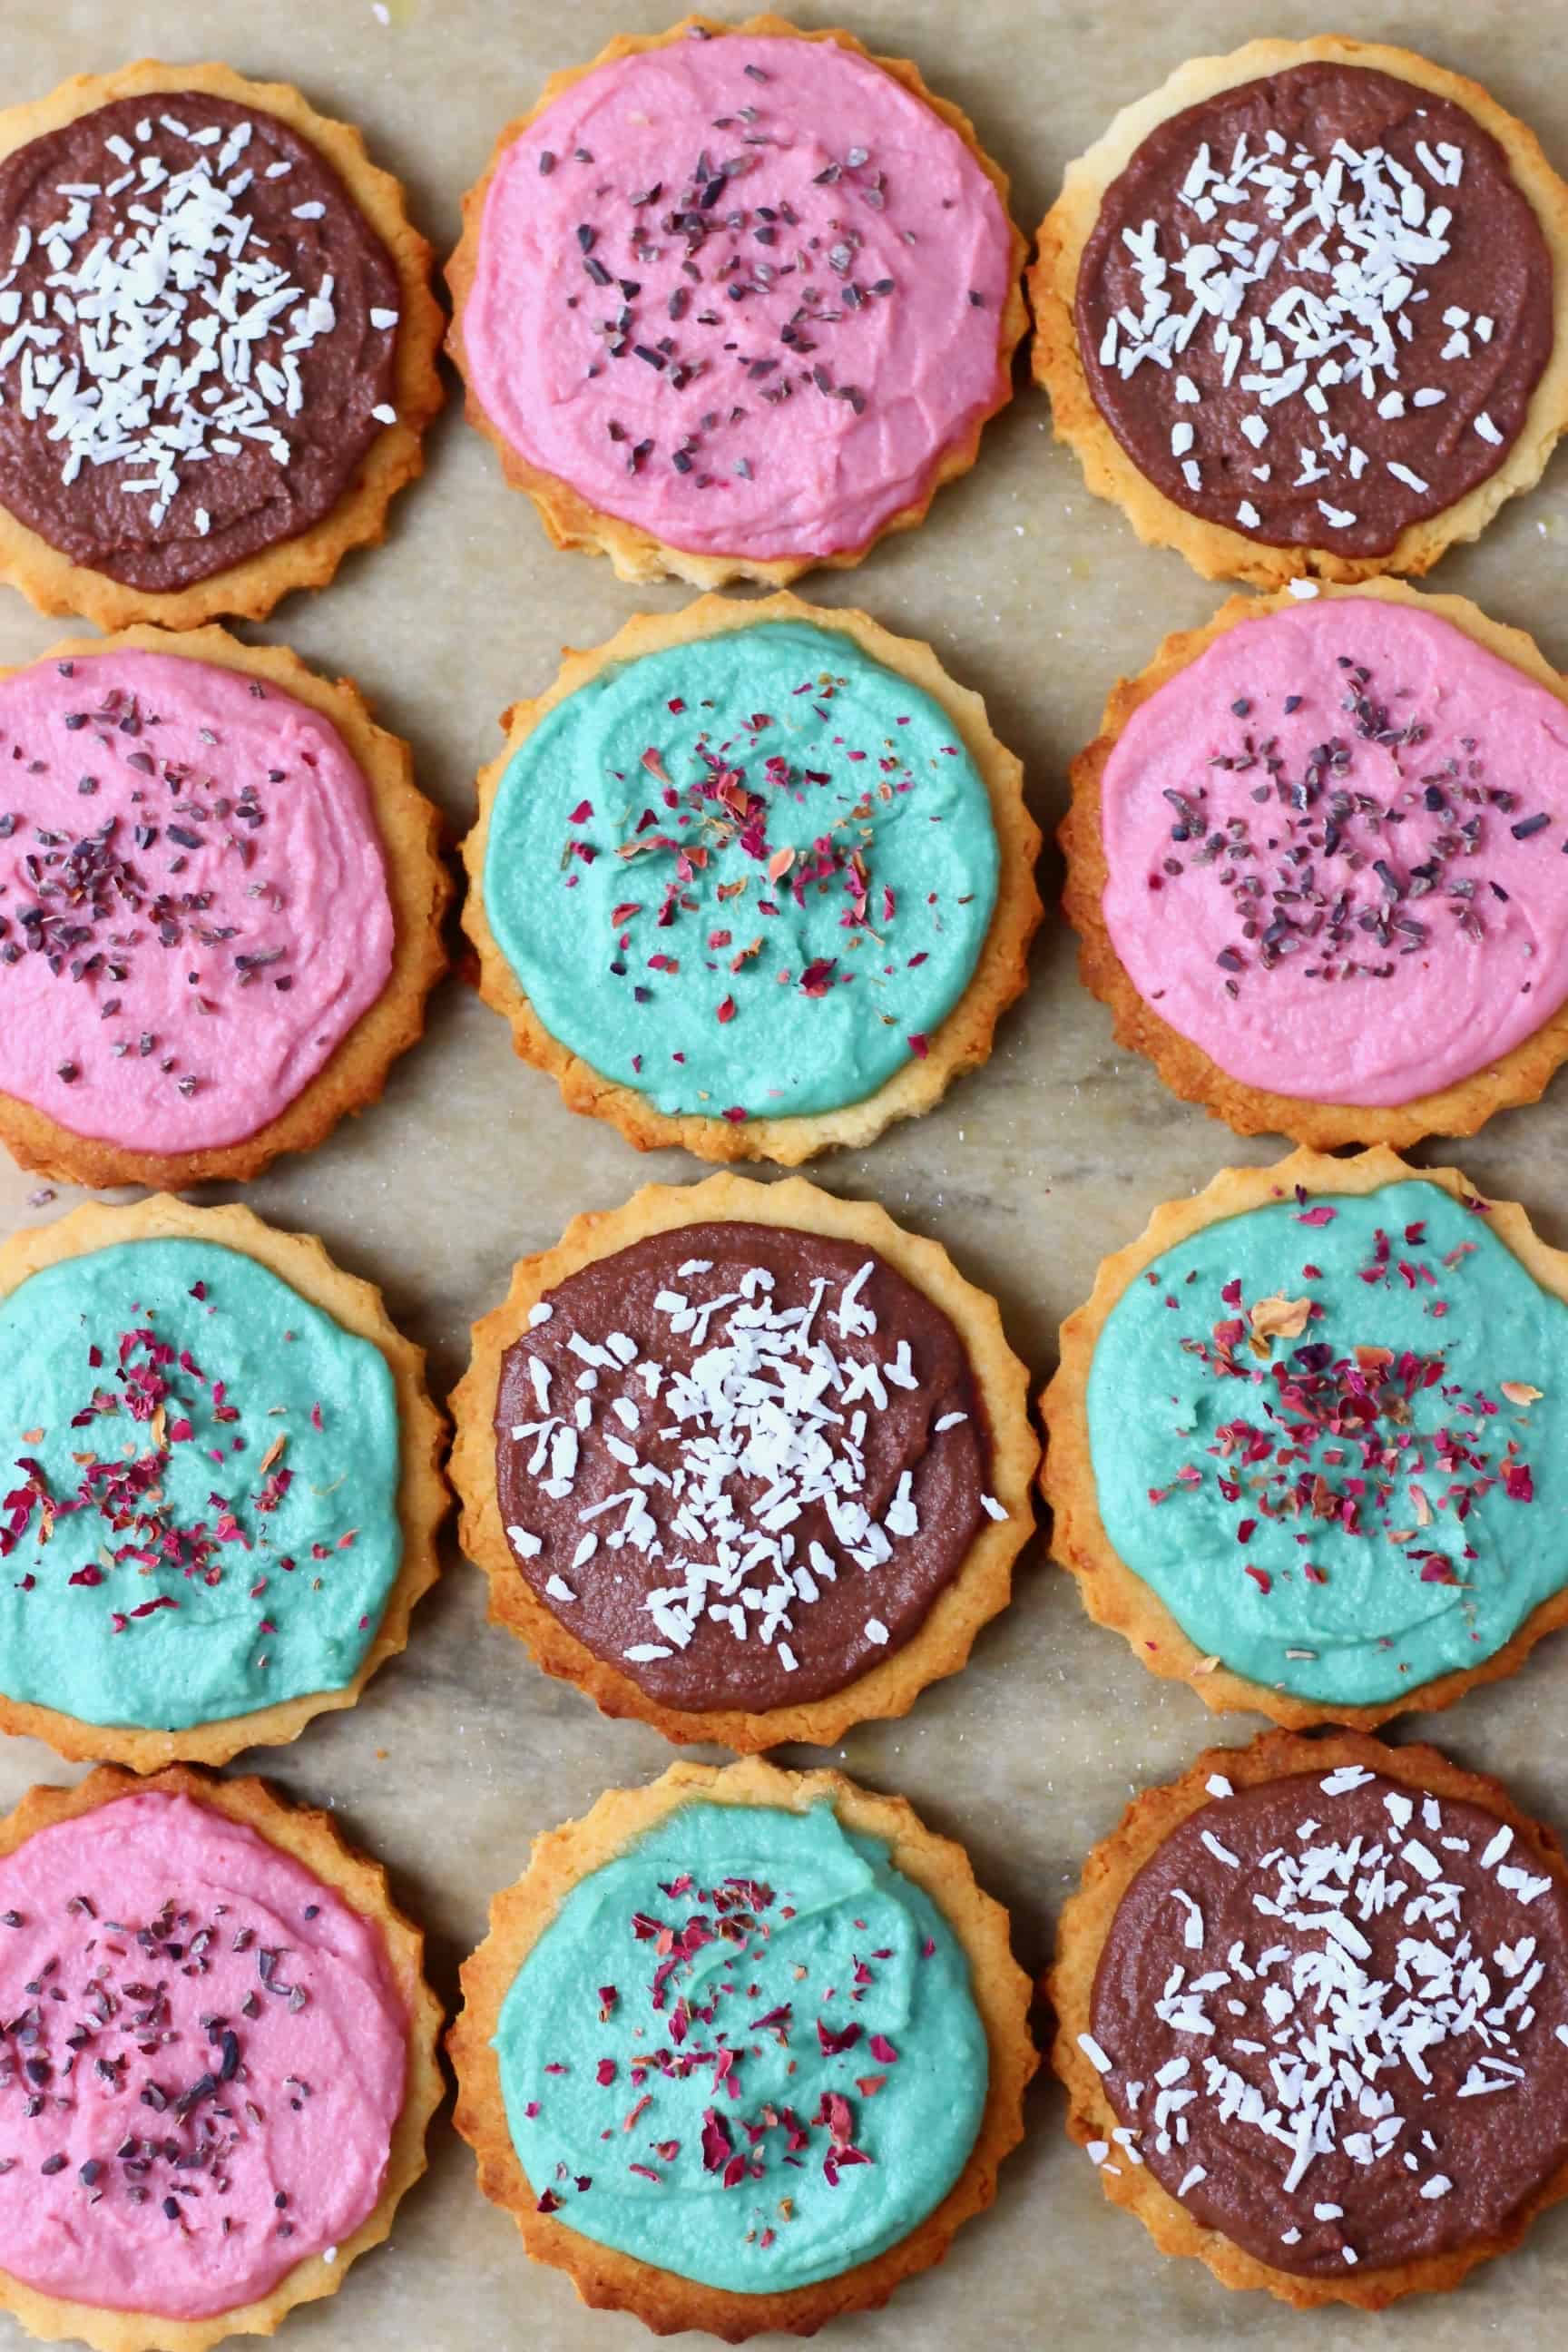 Twelve gluten-free vegan sugar cookies topped with different coloured frosting and sprinkles on a sheet of baking paper